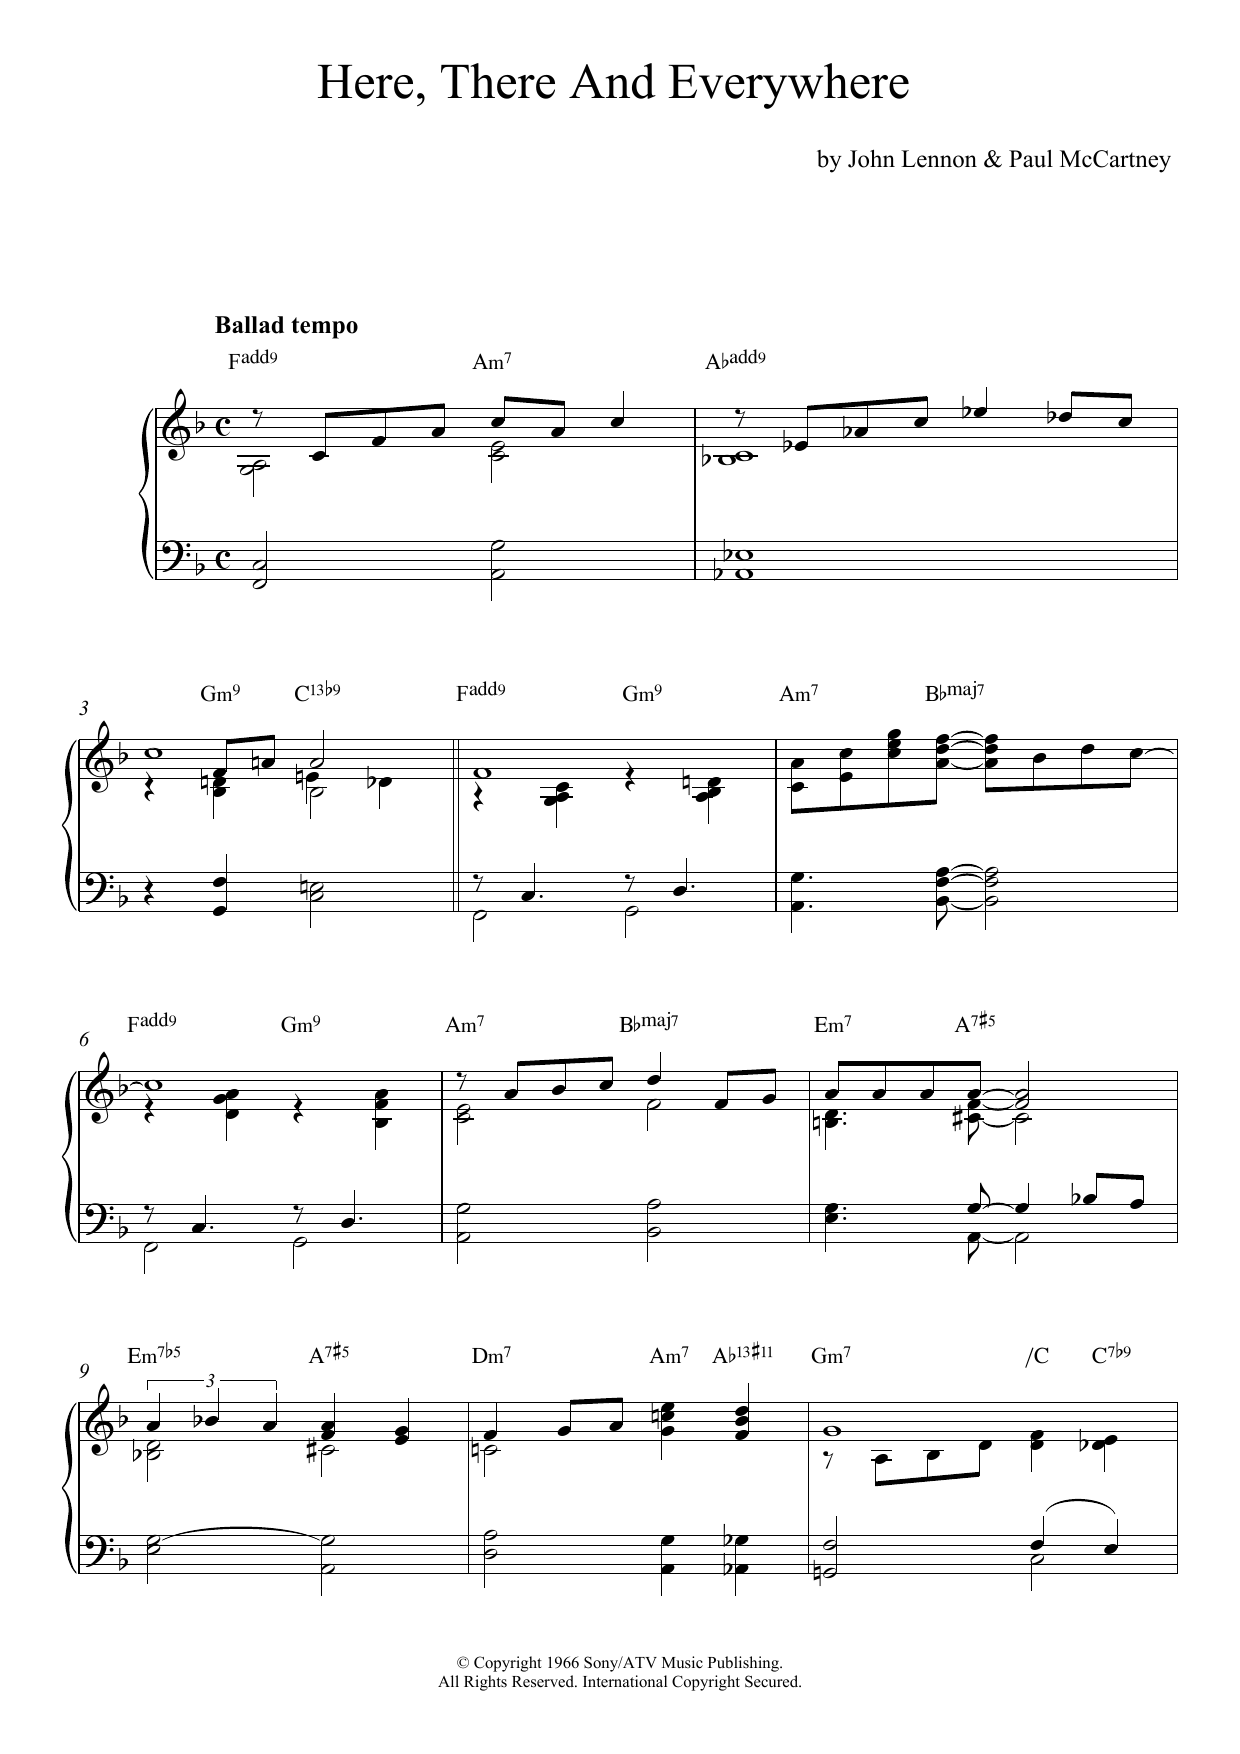 Download The Beatles Here, There And Everywhere (jazz versio Sheet Music